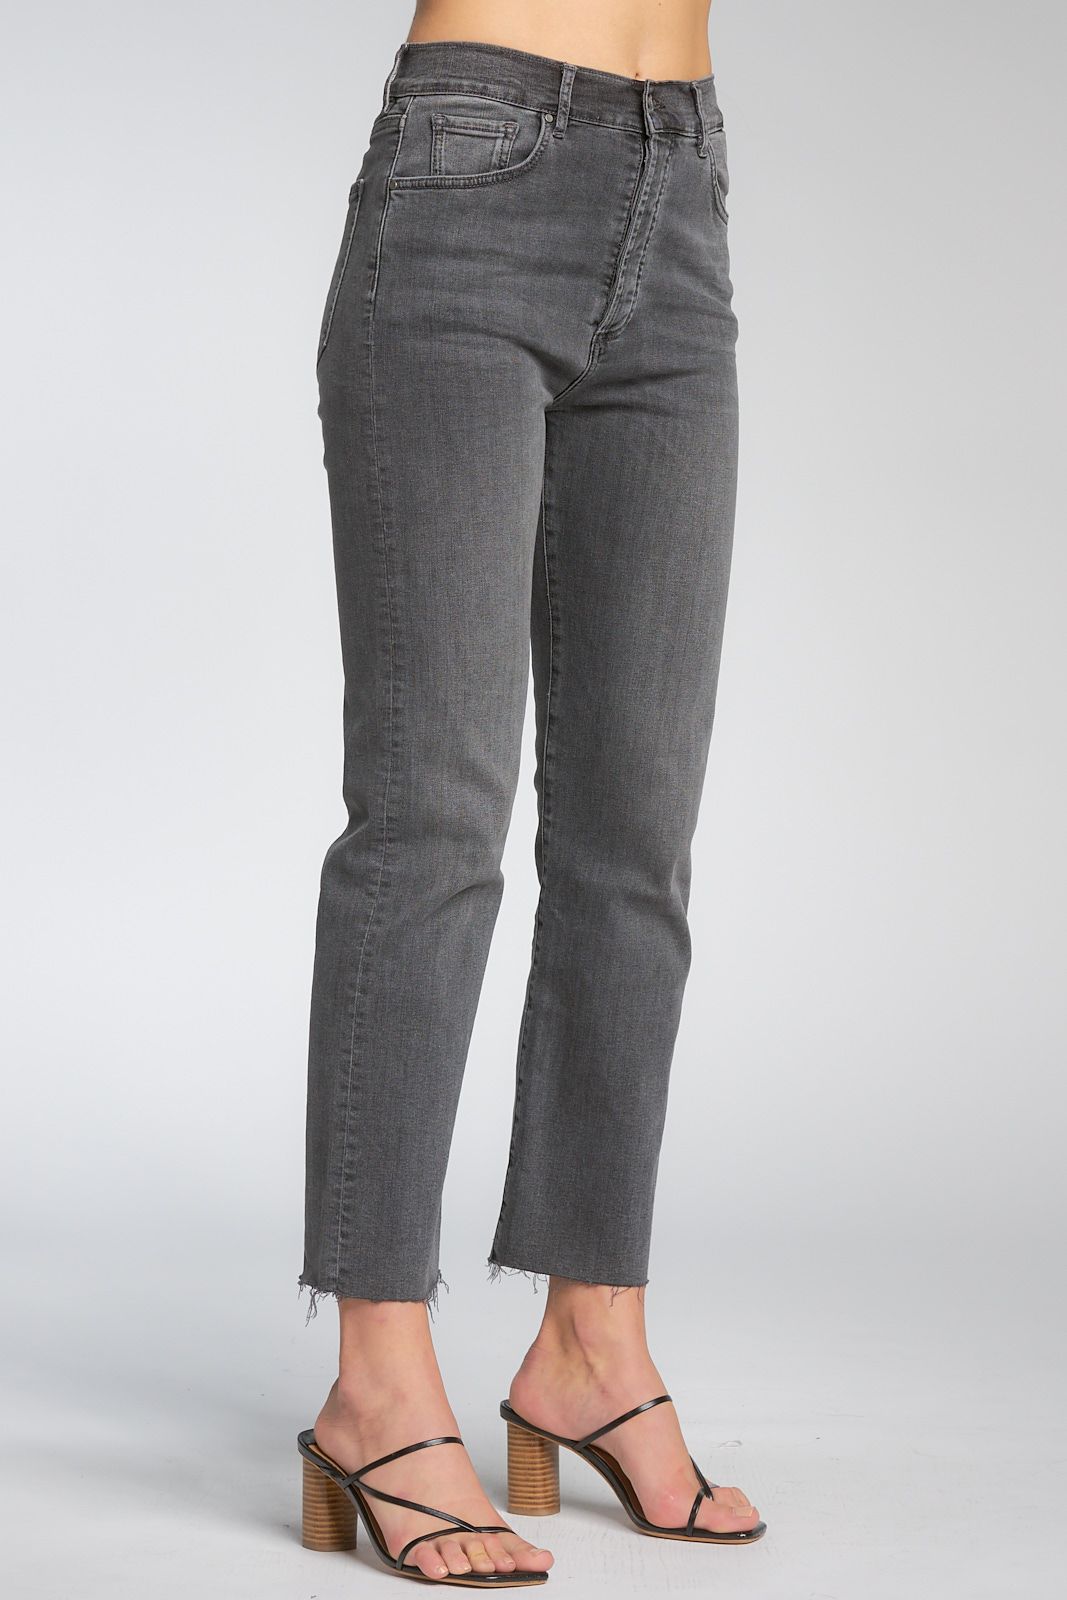 Straight Cut Jeans | Grey - Main Image Number 2 of 3